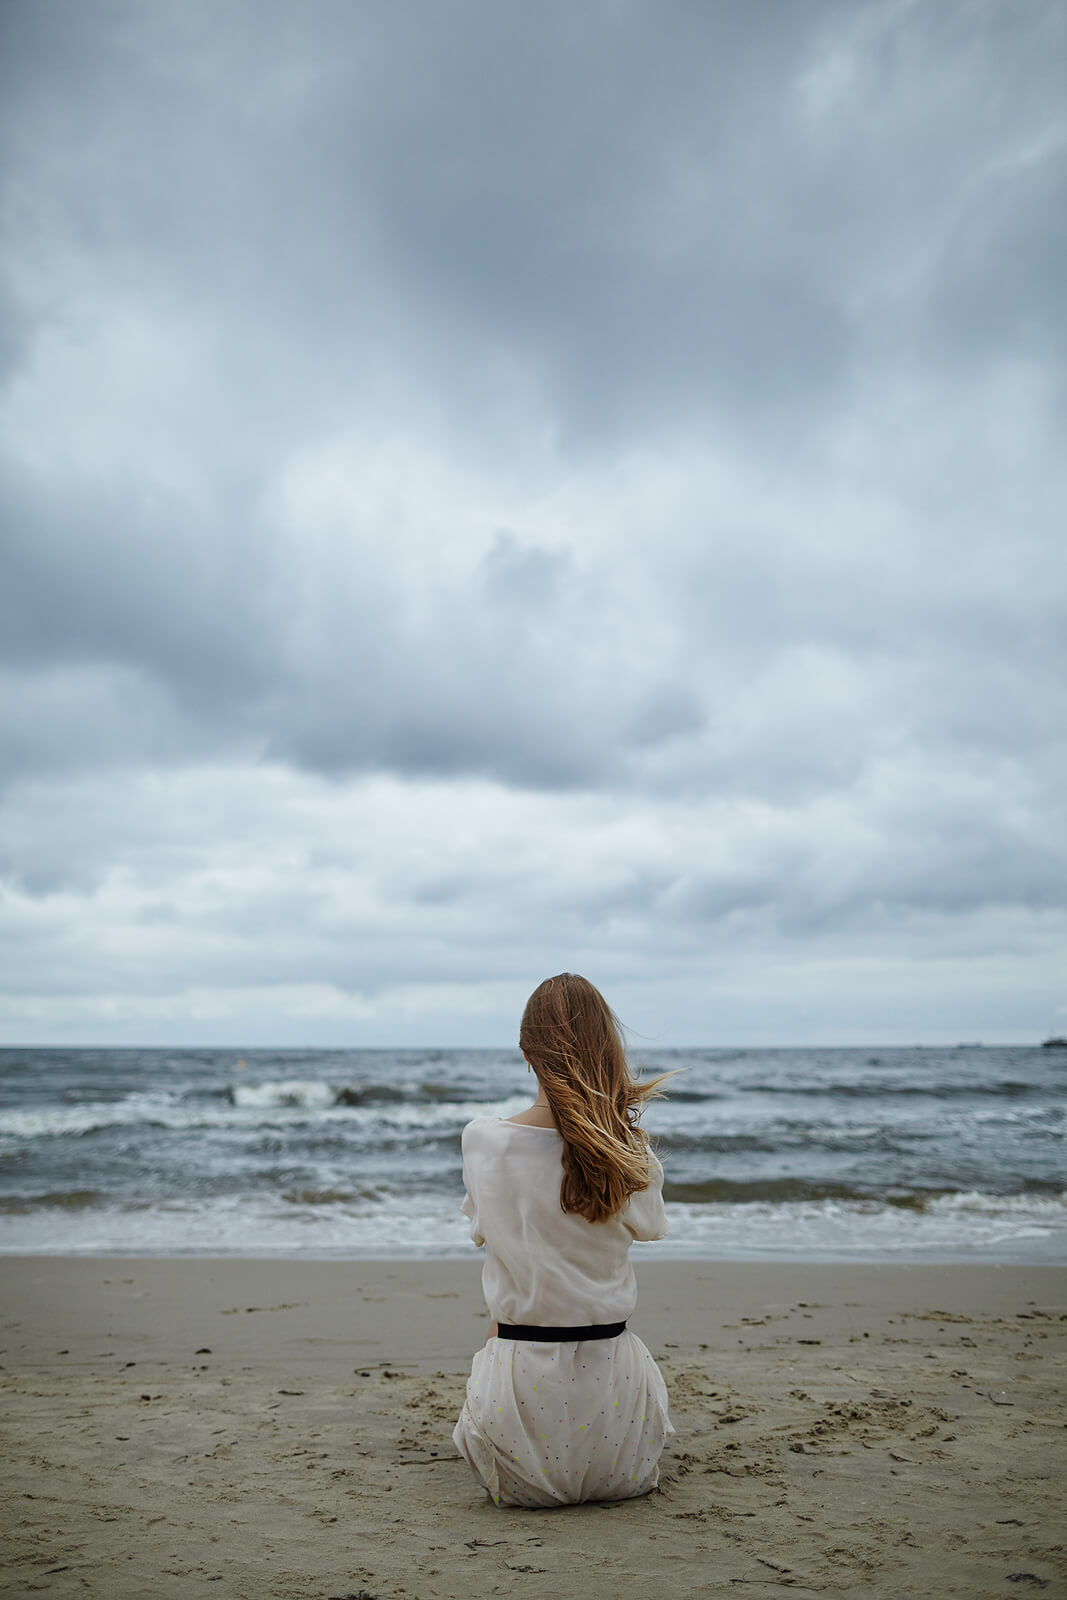 Image of a woman sitting on a sandy beach during a stormy day. Discover how to effectively manage your anxiety symptoms with the help of anxiety therapy in Saint Petersburg, FL.